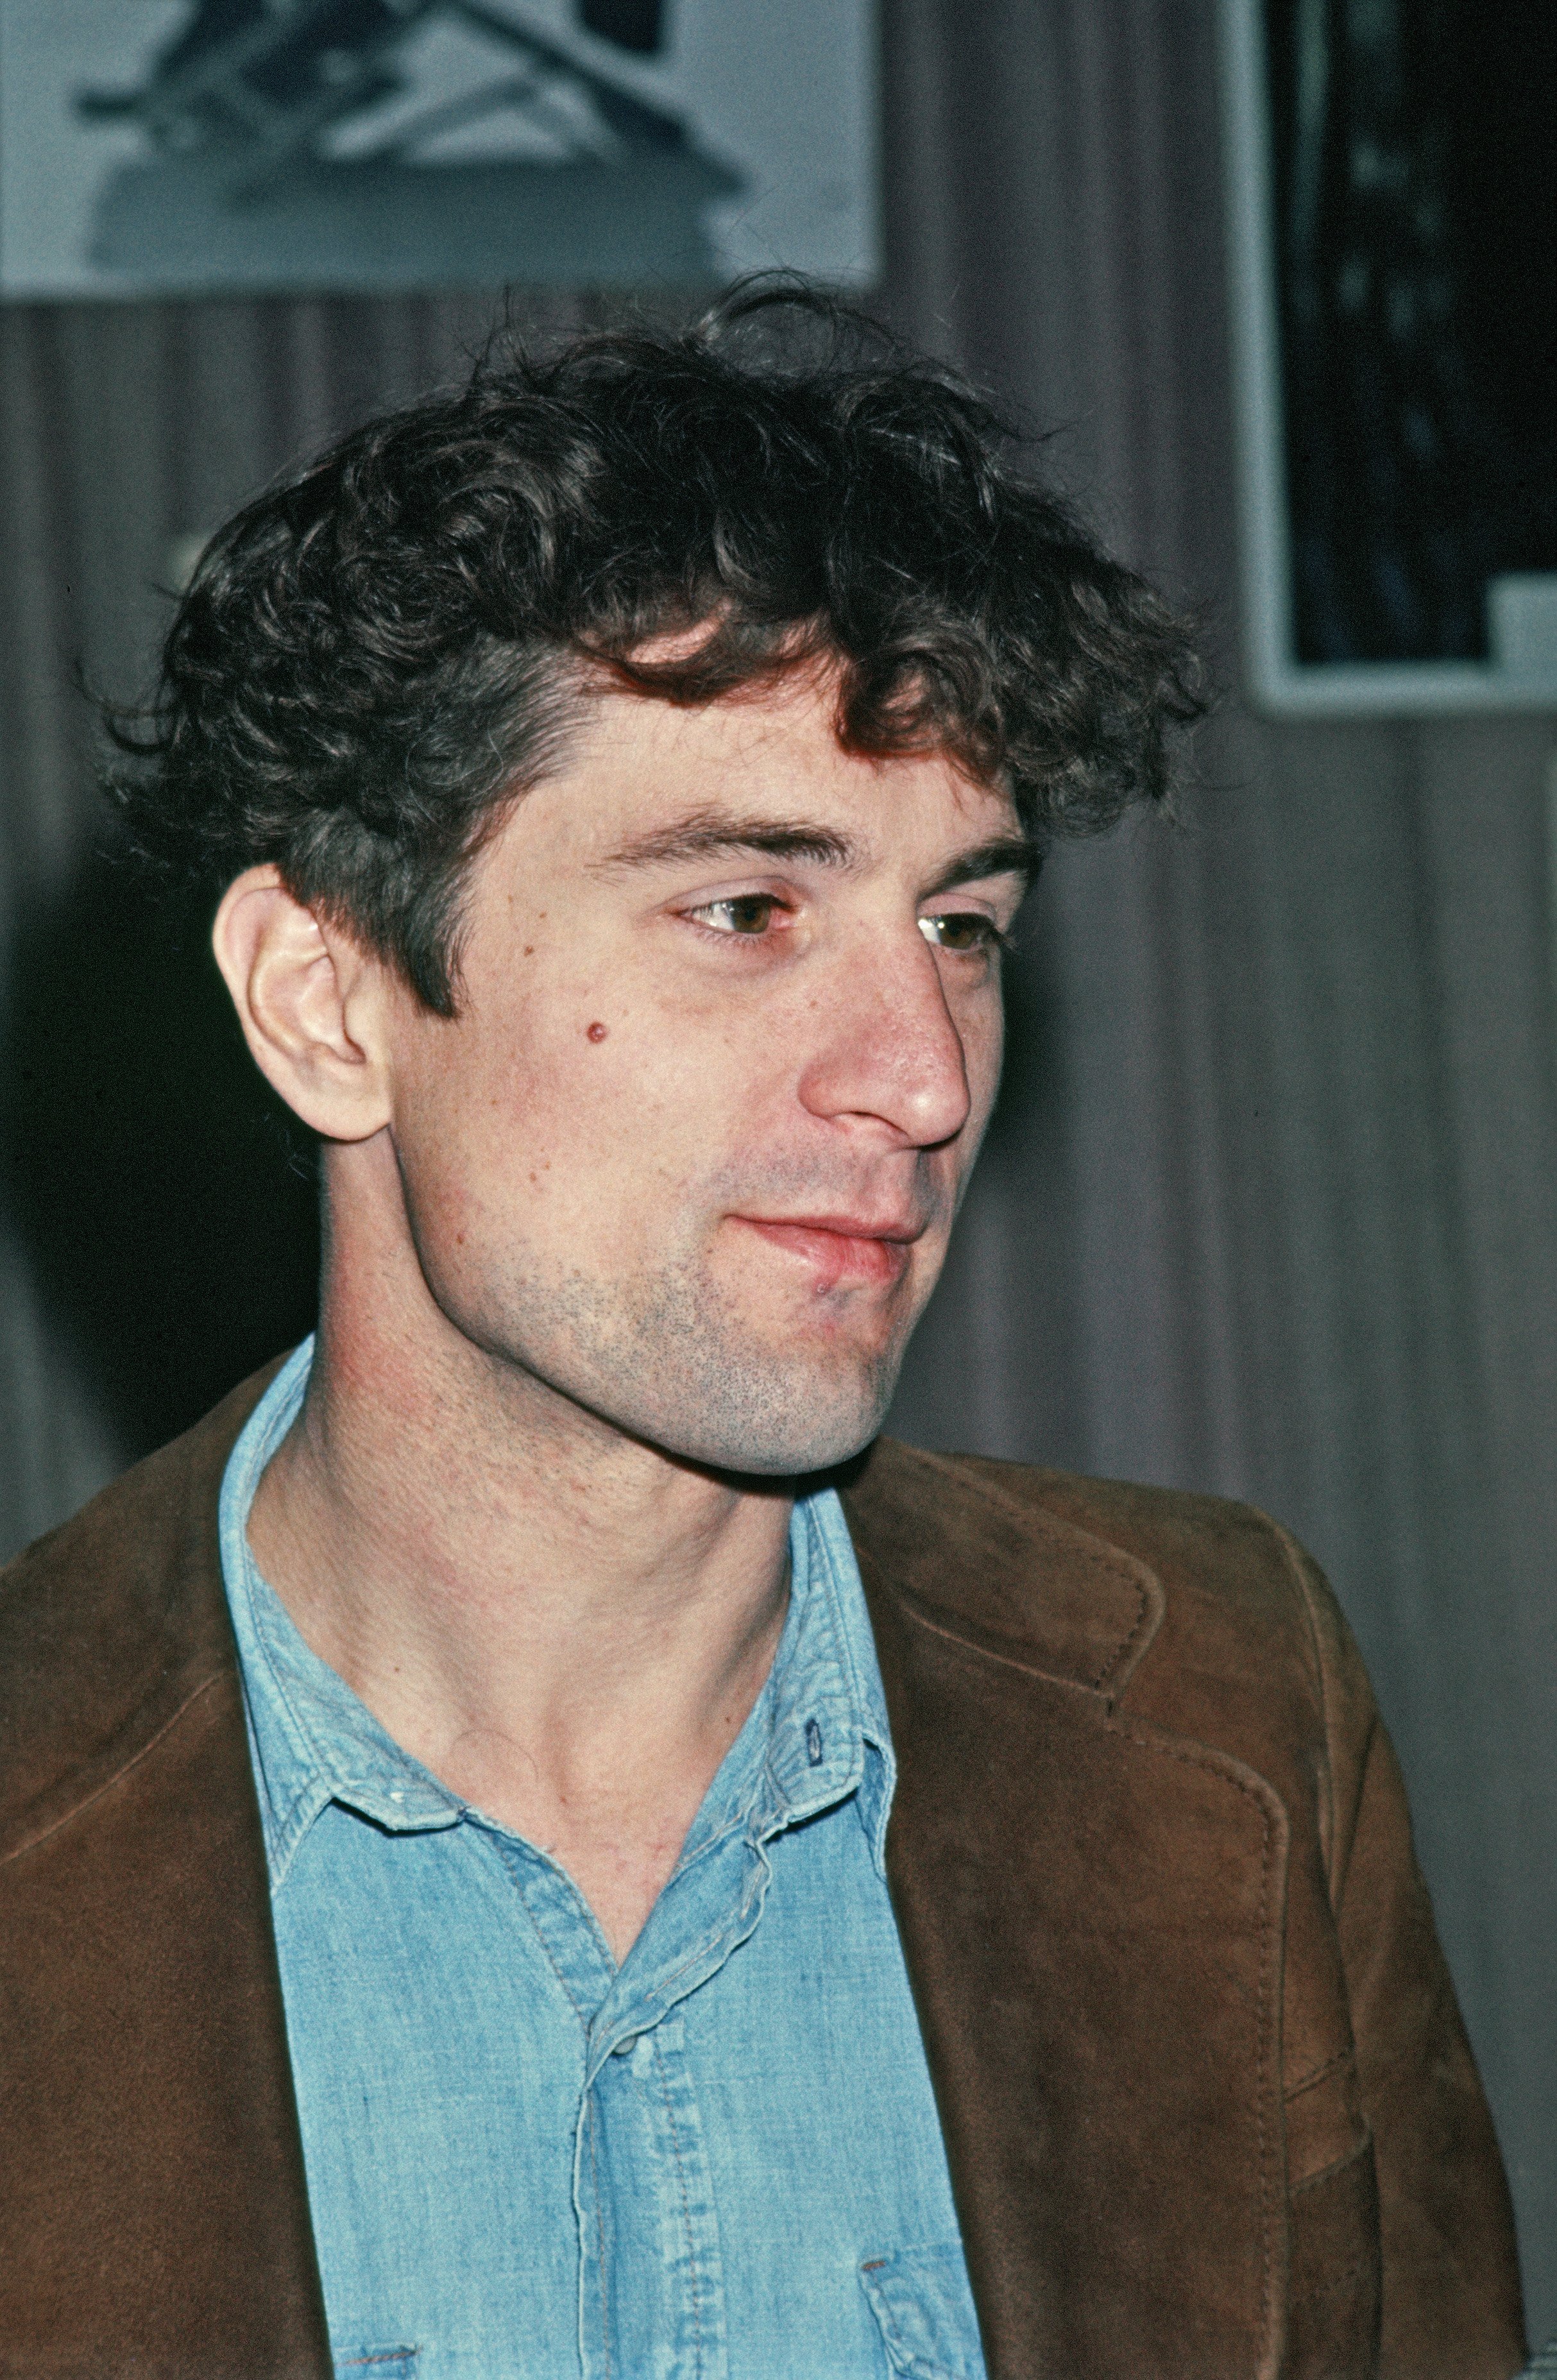 Robert de Niro during a night on the town circa the early-1970s in New York | Source: Getty Images